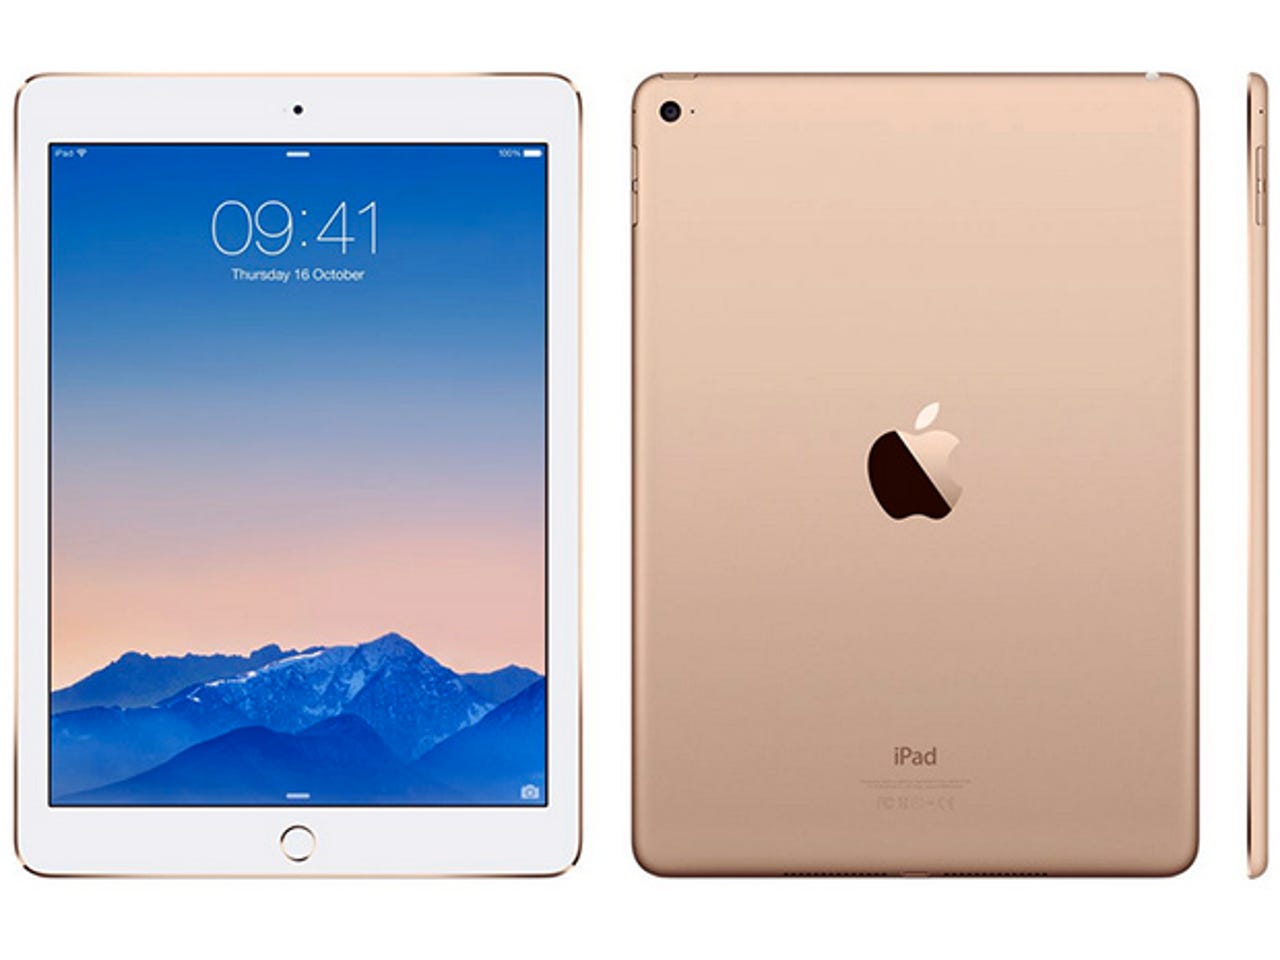 Apple iPad Air 2 review: Slimmer and faster, but a smaller battery